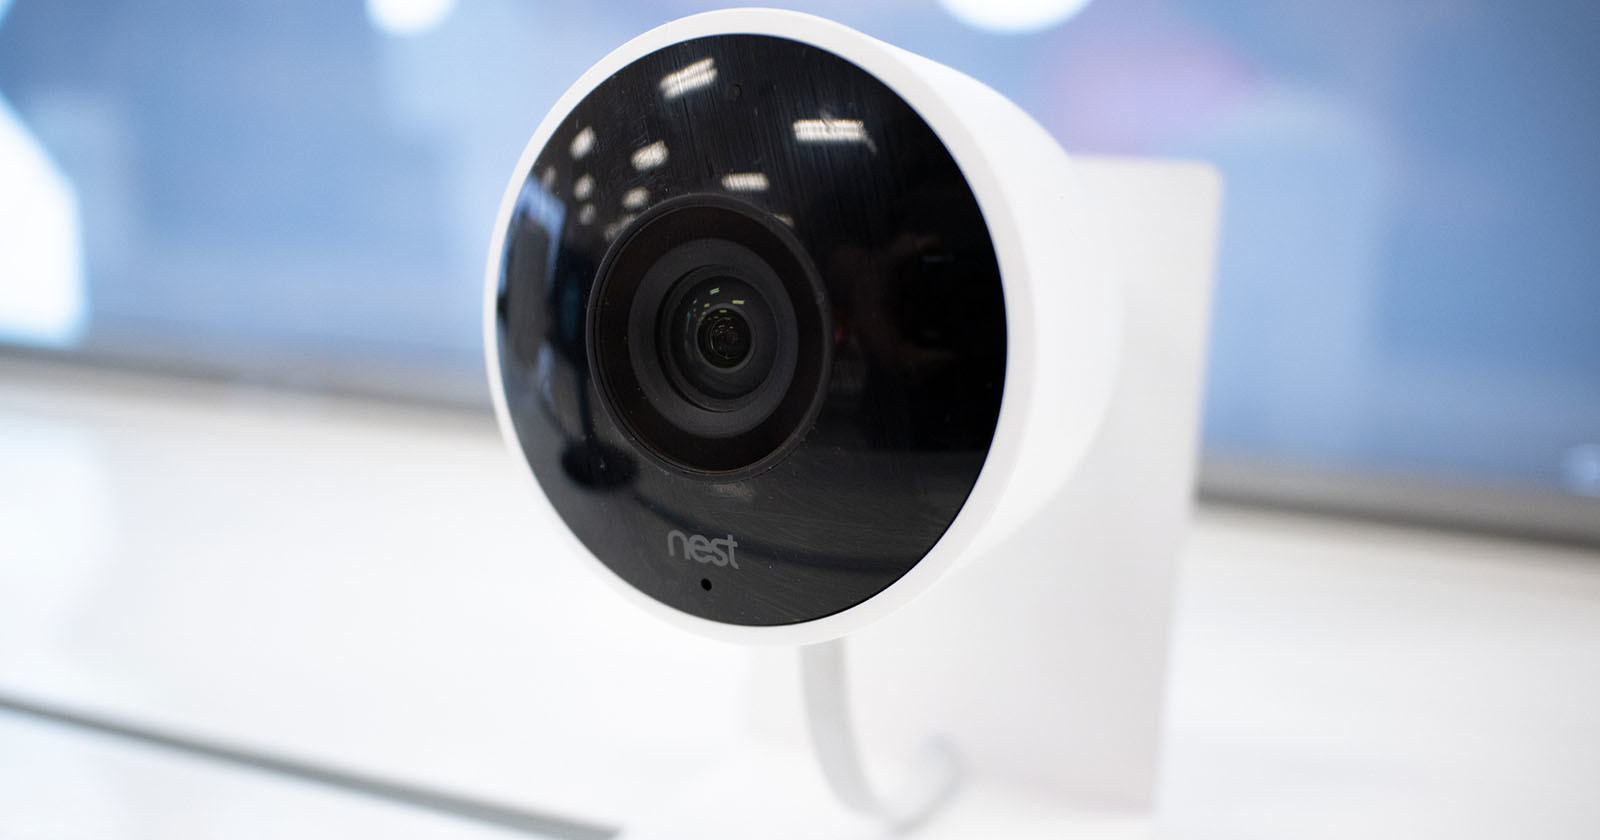 Googles Nest Will Provide Data to Police Without a Warrant